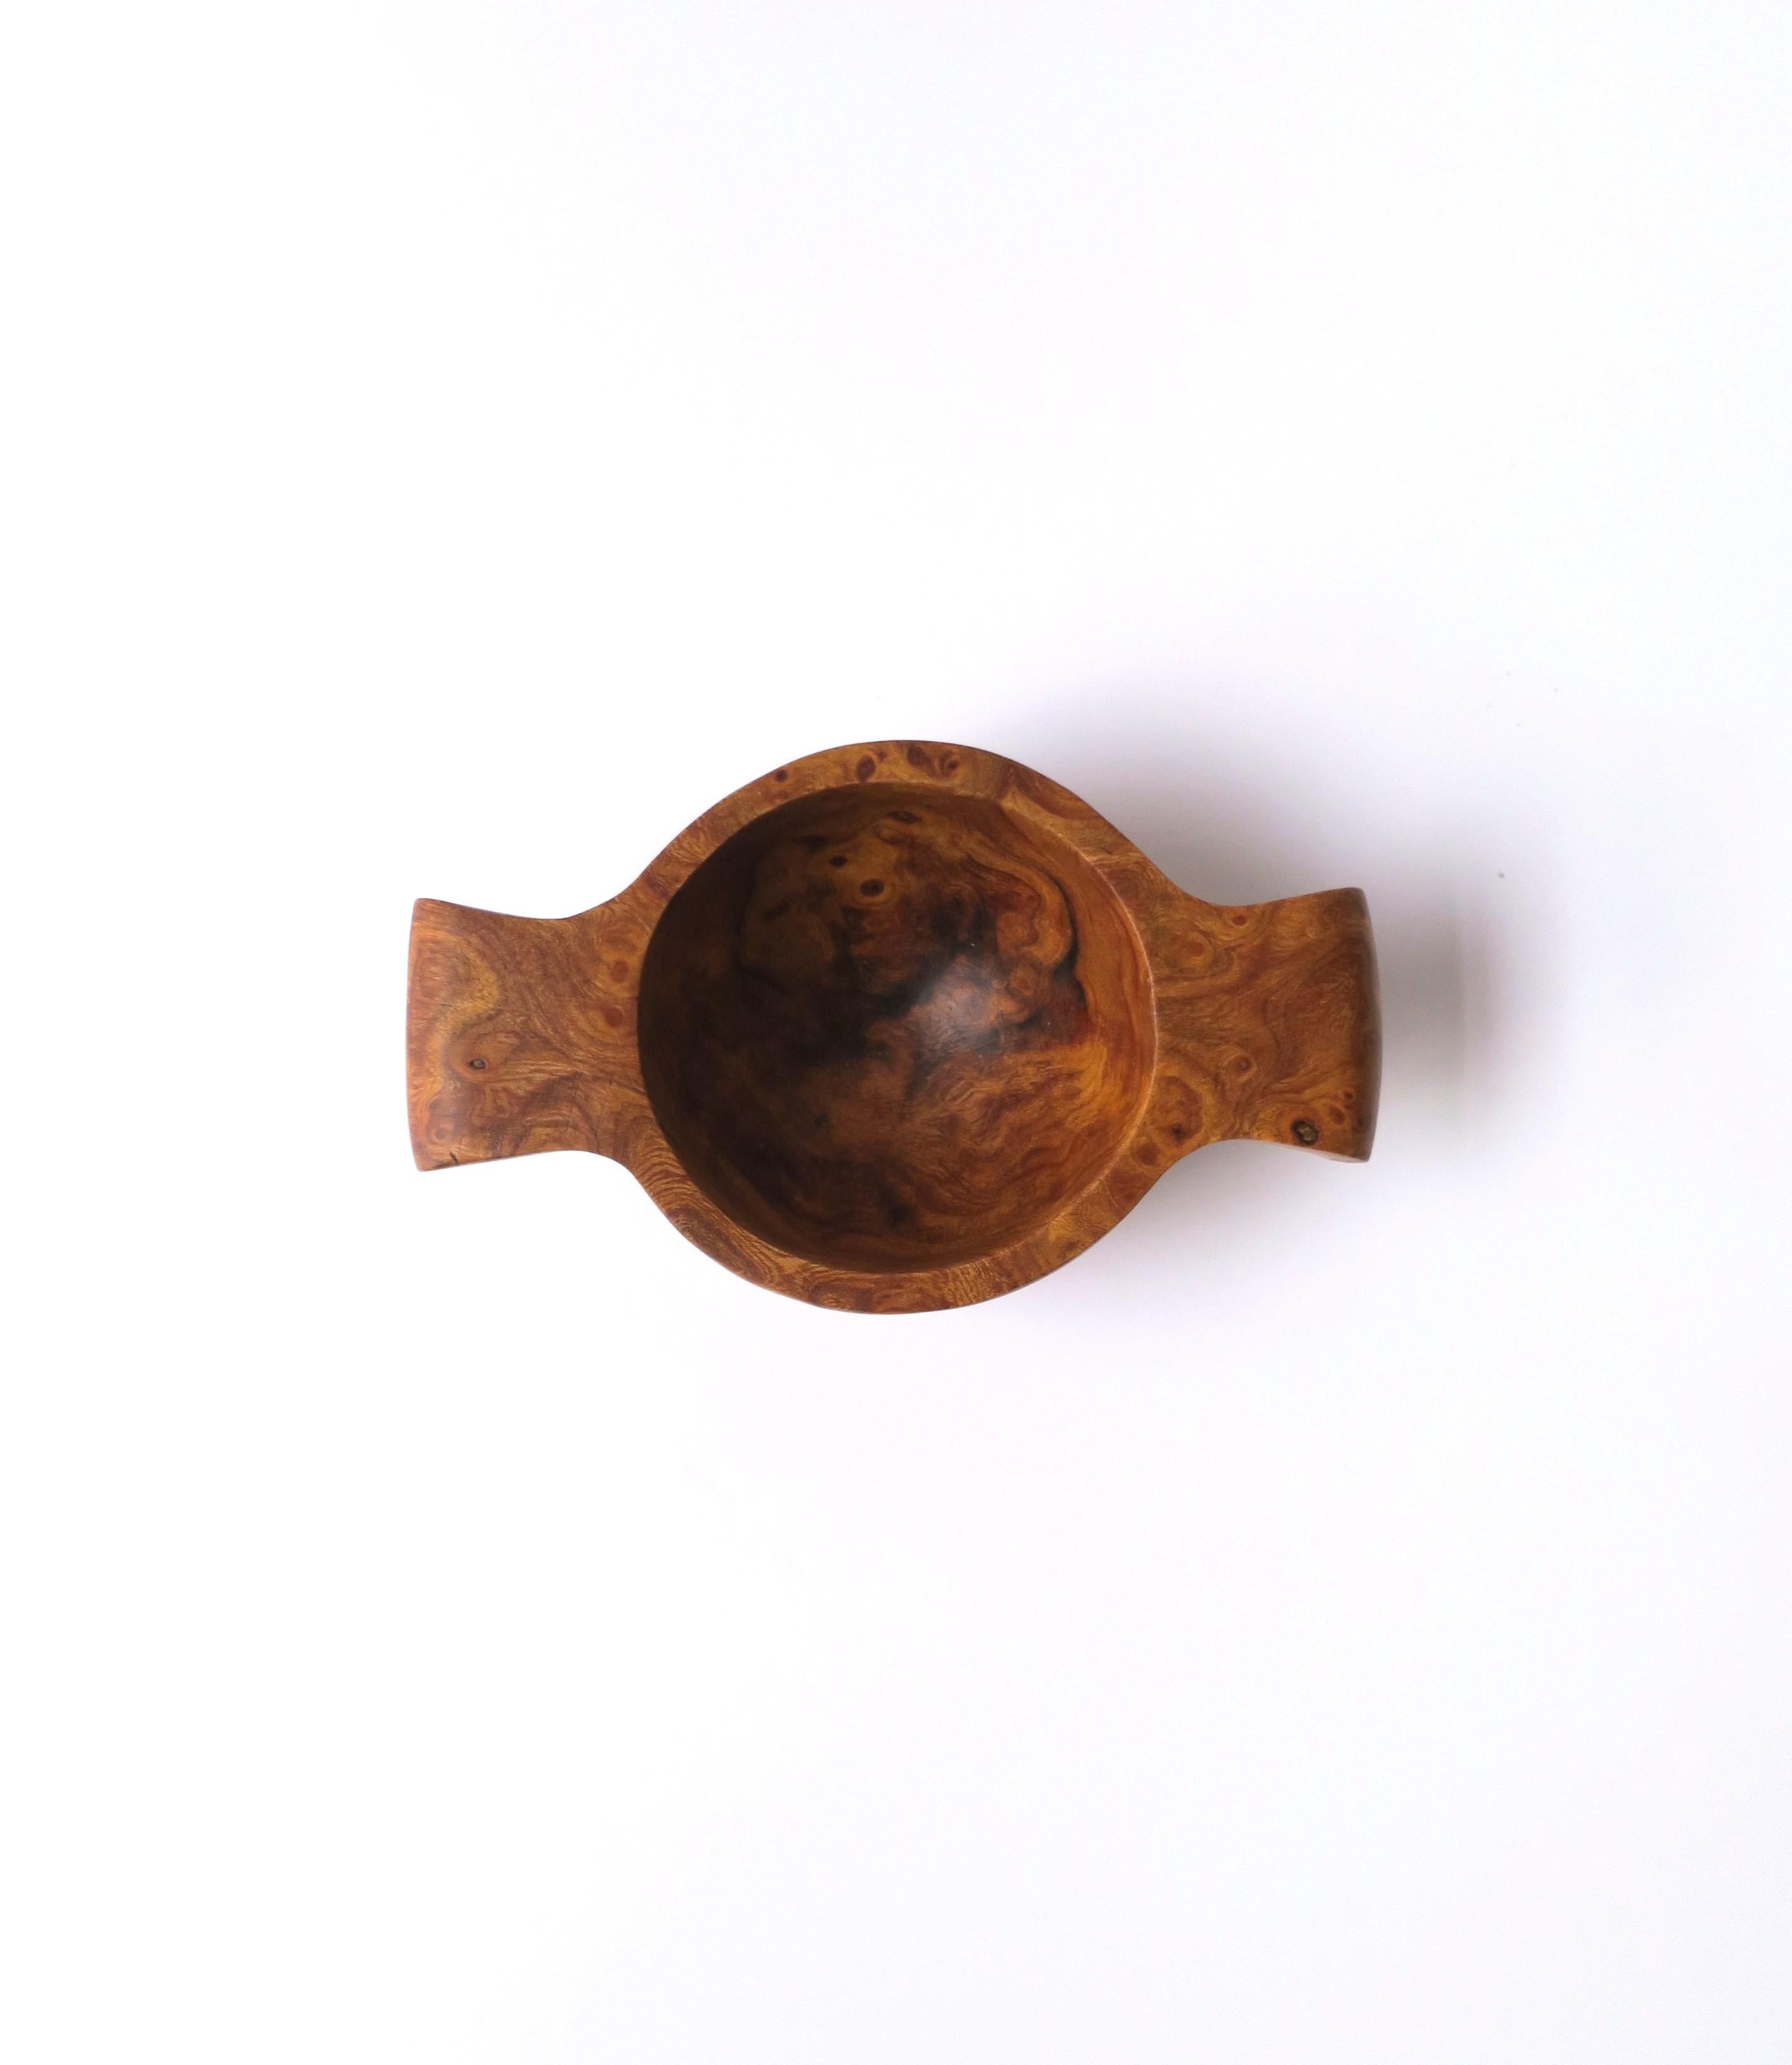 A small burl wood bowl with handles, organic modern/minimalist style, circa late-20th century to early 21st century. Piece is made from one piece of burl. Piece can hold small items on a vanity, desk, in a kitchen, etc. Shown holding earrings in